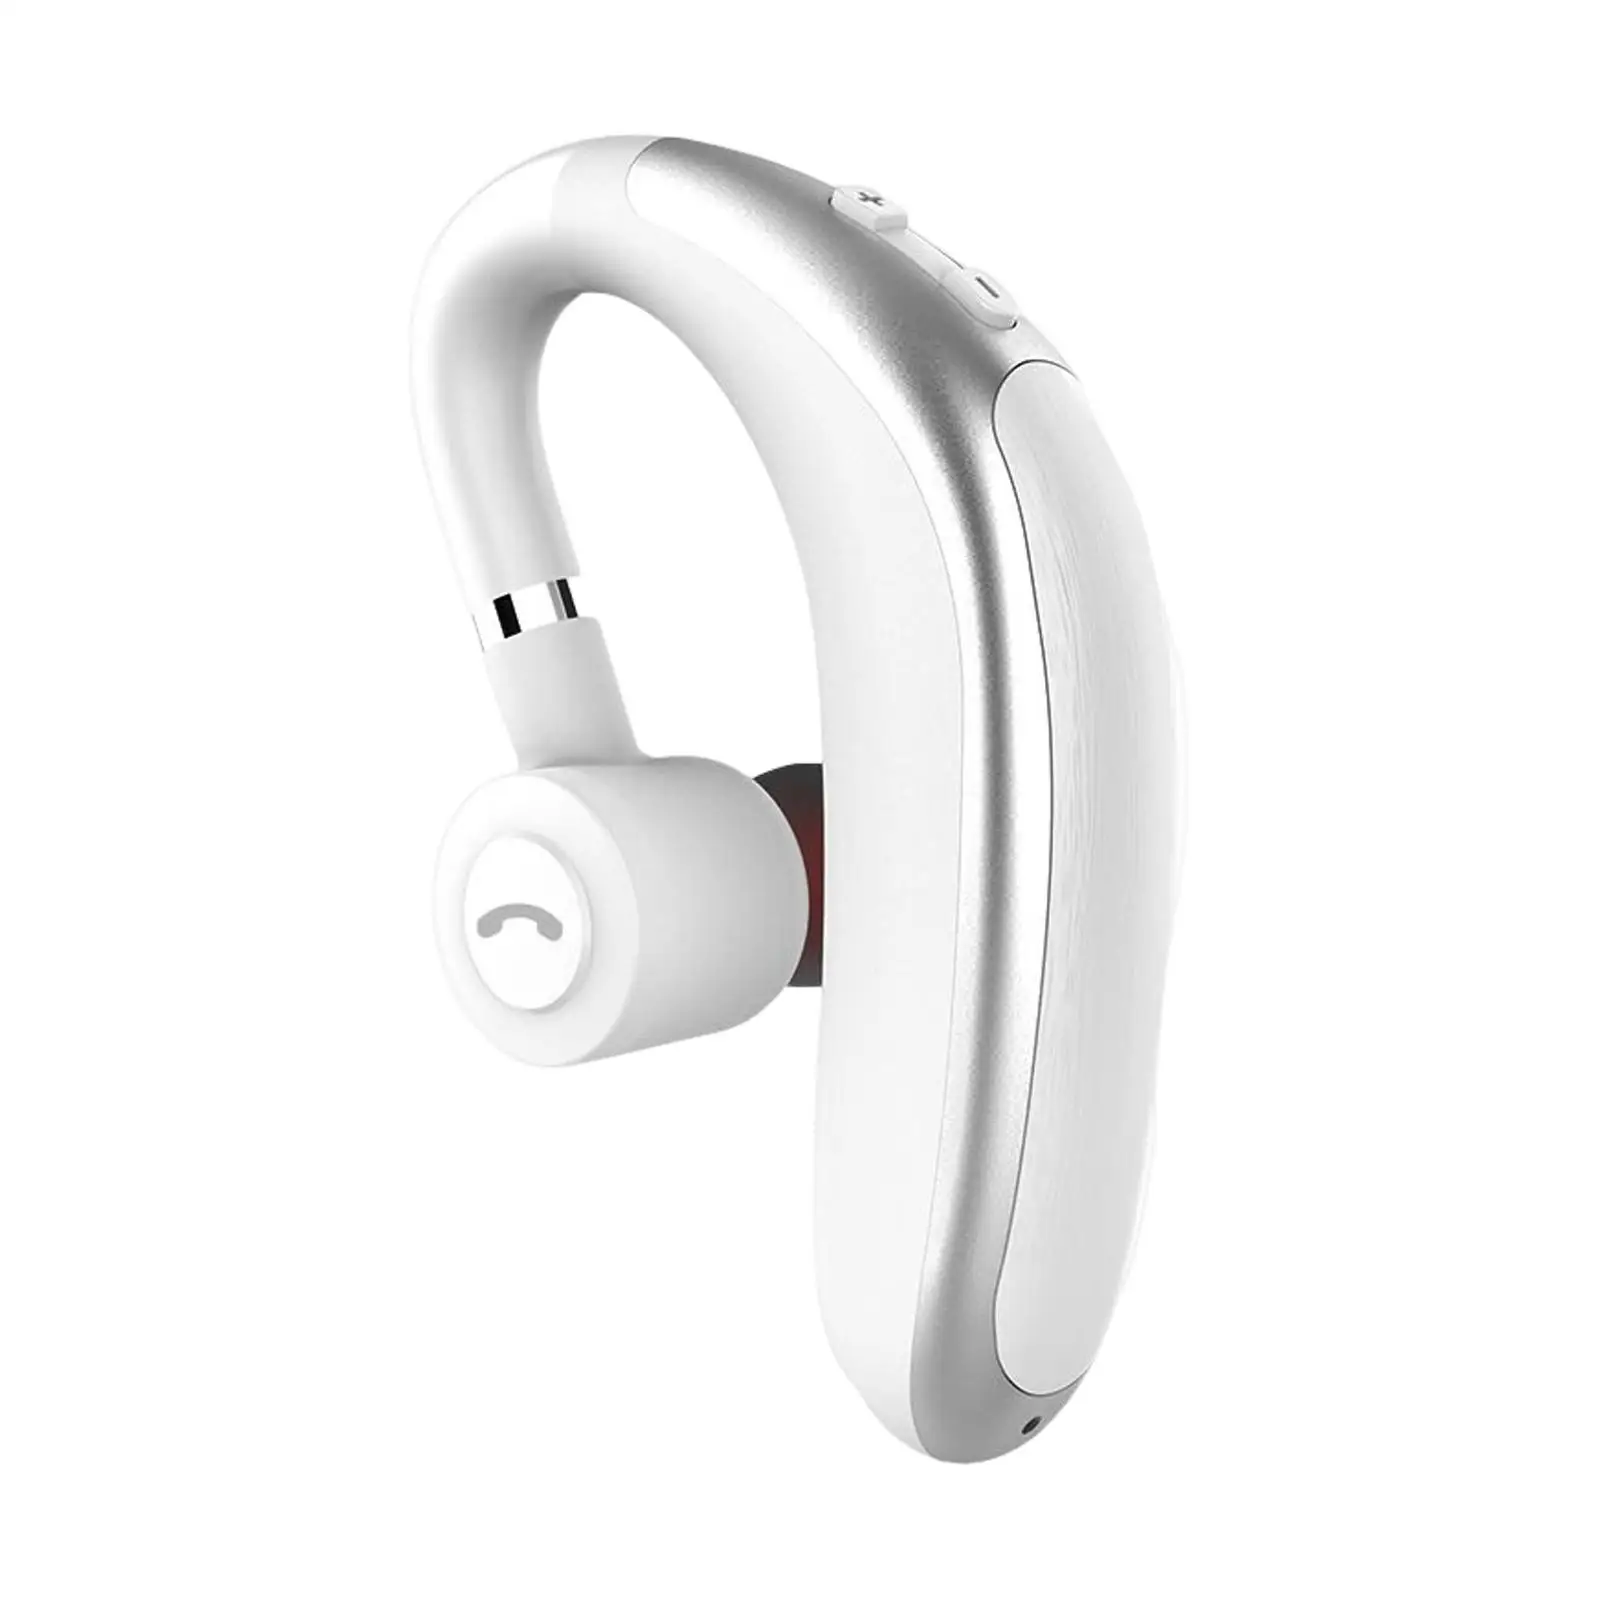 Single Ear Hook Bluetooth Headset with Rotatable Mic Stereo Lightweight Noise Cancelling Bluetooth Earpiece for Driving Office